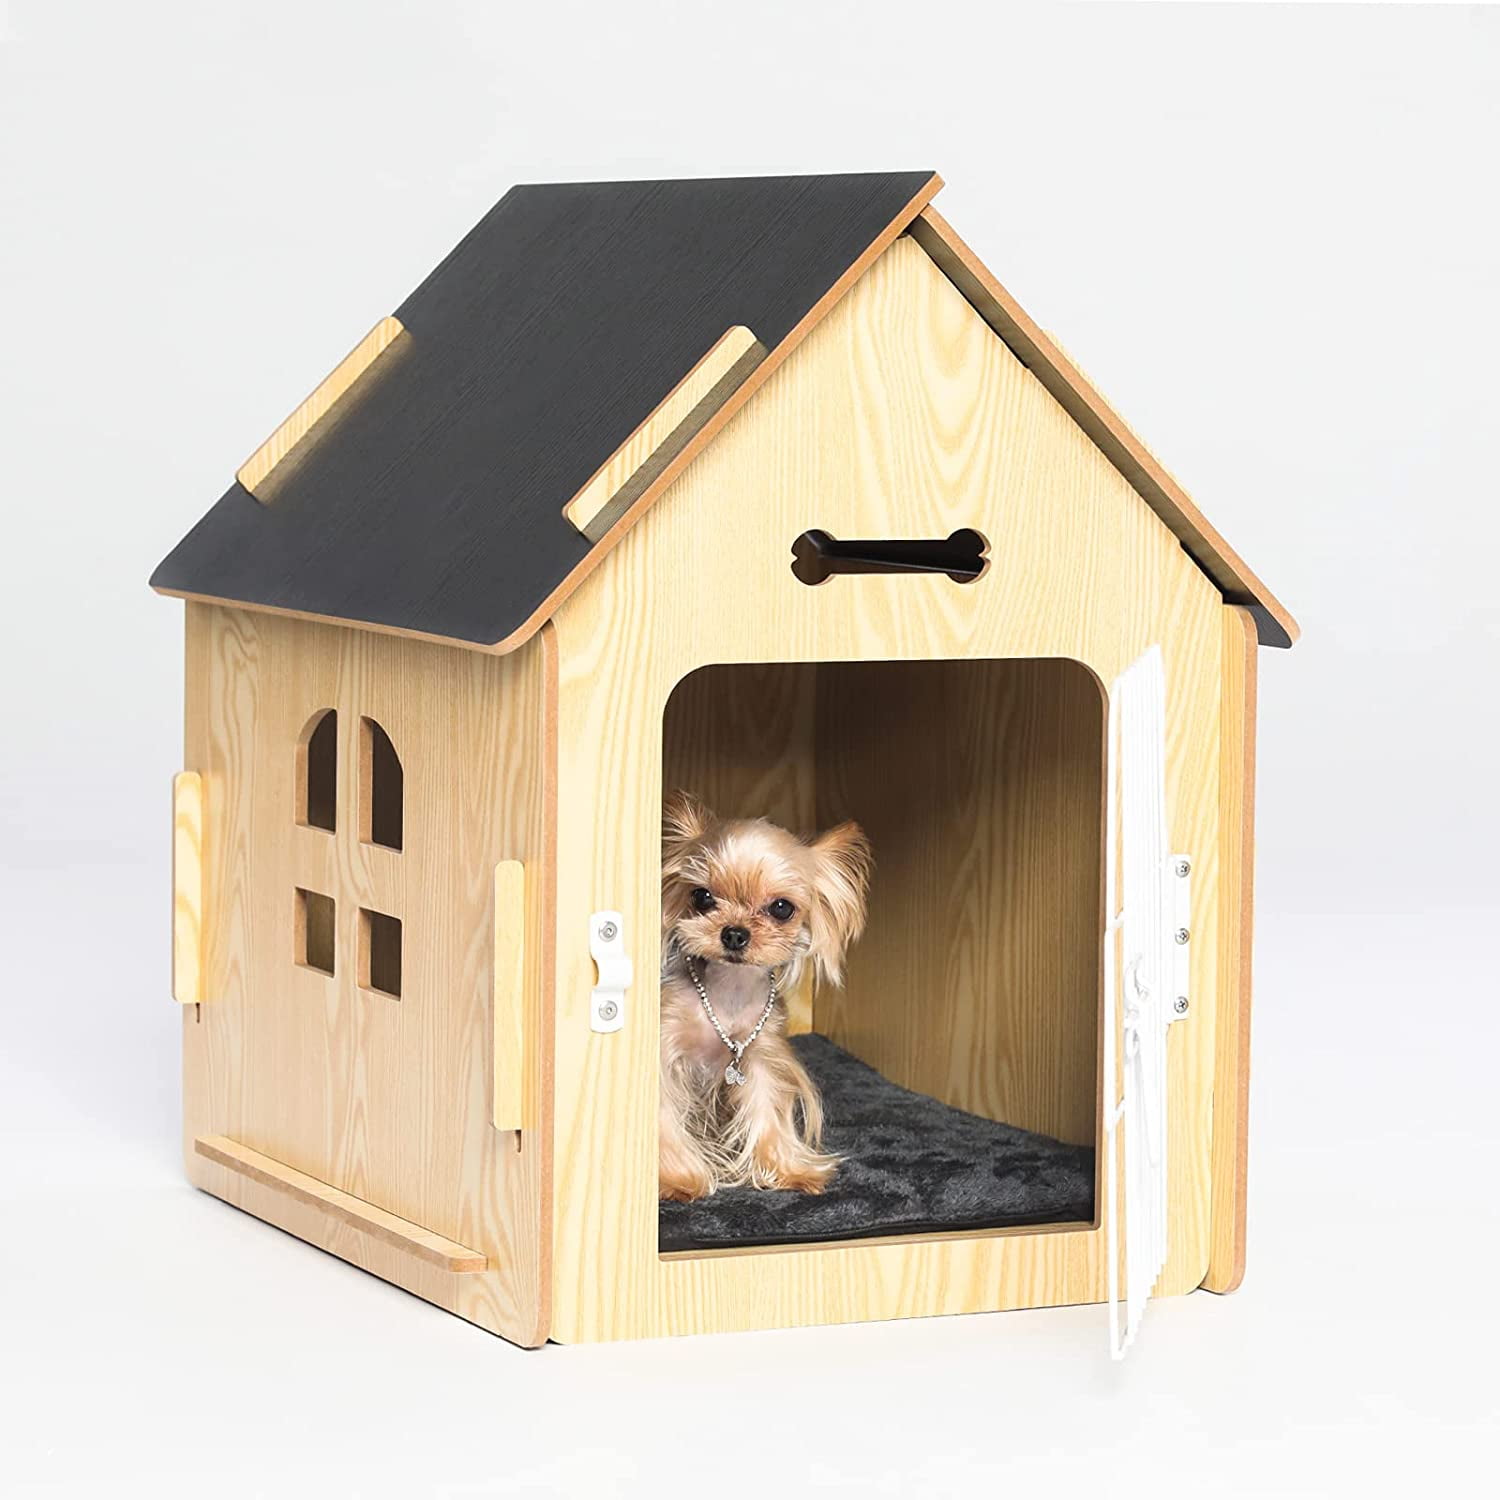 Dog House Indoor for Small Dogs Other Small Animals Such as Cats and Rabbits Wooden Detachable with Air Vents and Elevated Floor - Walmart.com